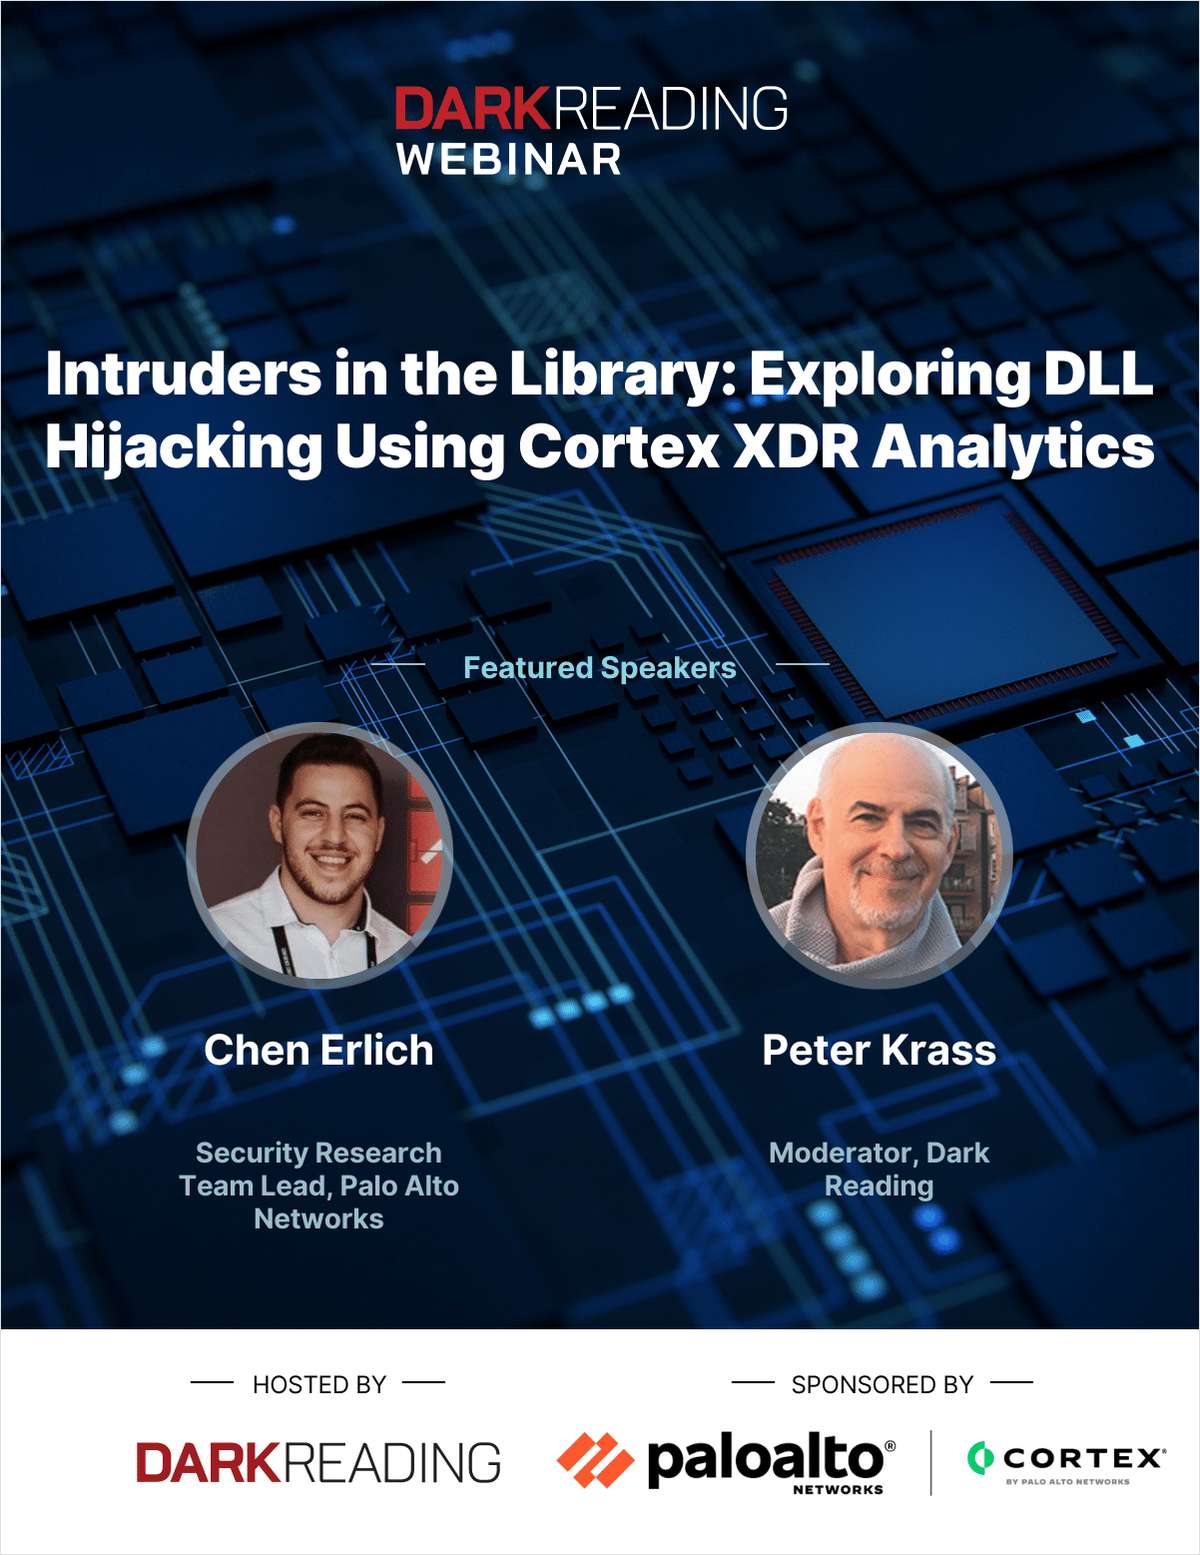 Intruders in the Library: Exploring DLL Hijacking Using Cortex XDR Analytics